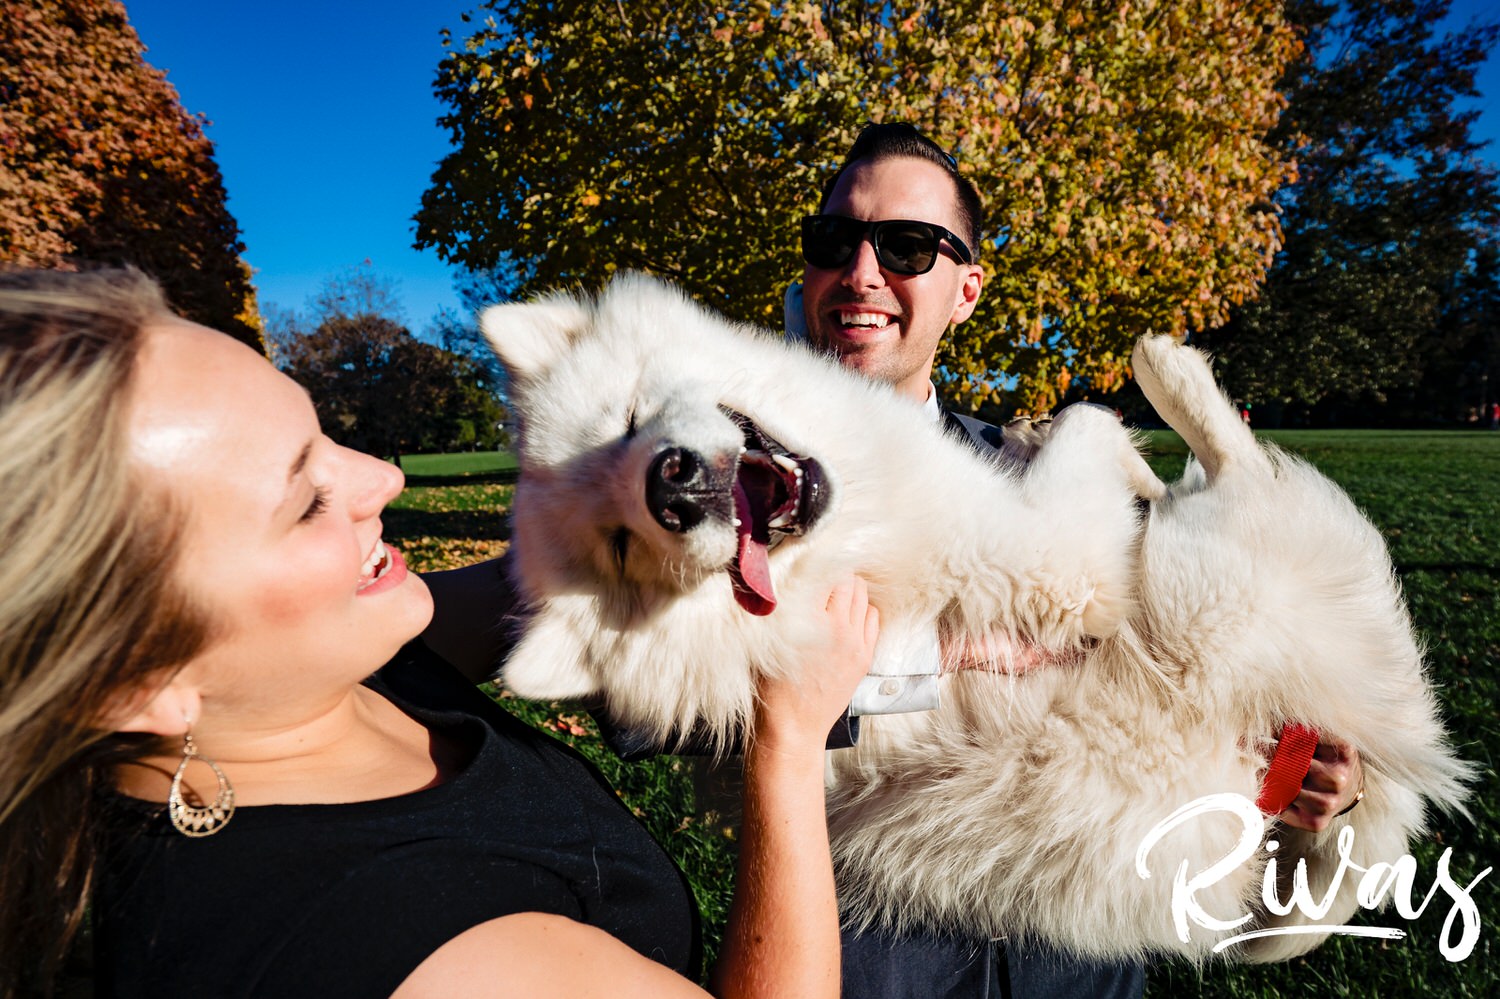 A candid picture of a man in a tuxedo and sunglasses holding a giant white dog in his arms as a woman leans in to scratch the dog. The dog's tongue is hanging out of his mouth sideways. 